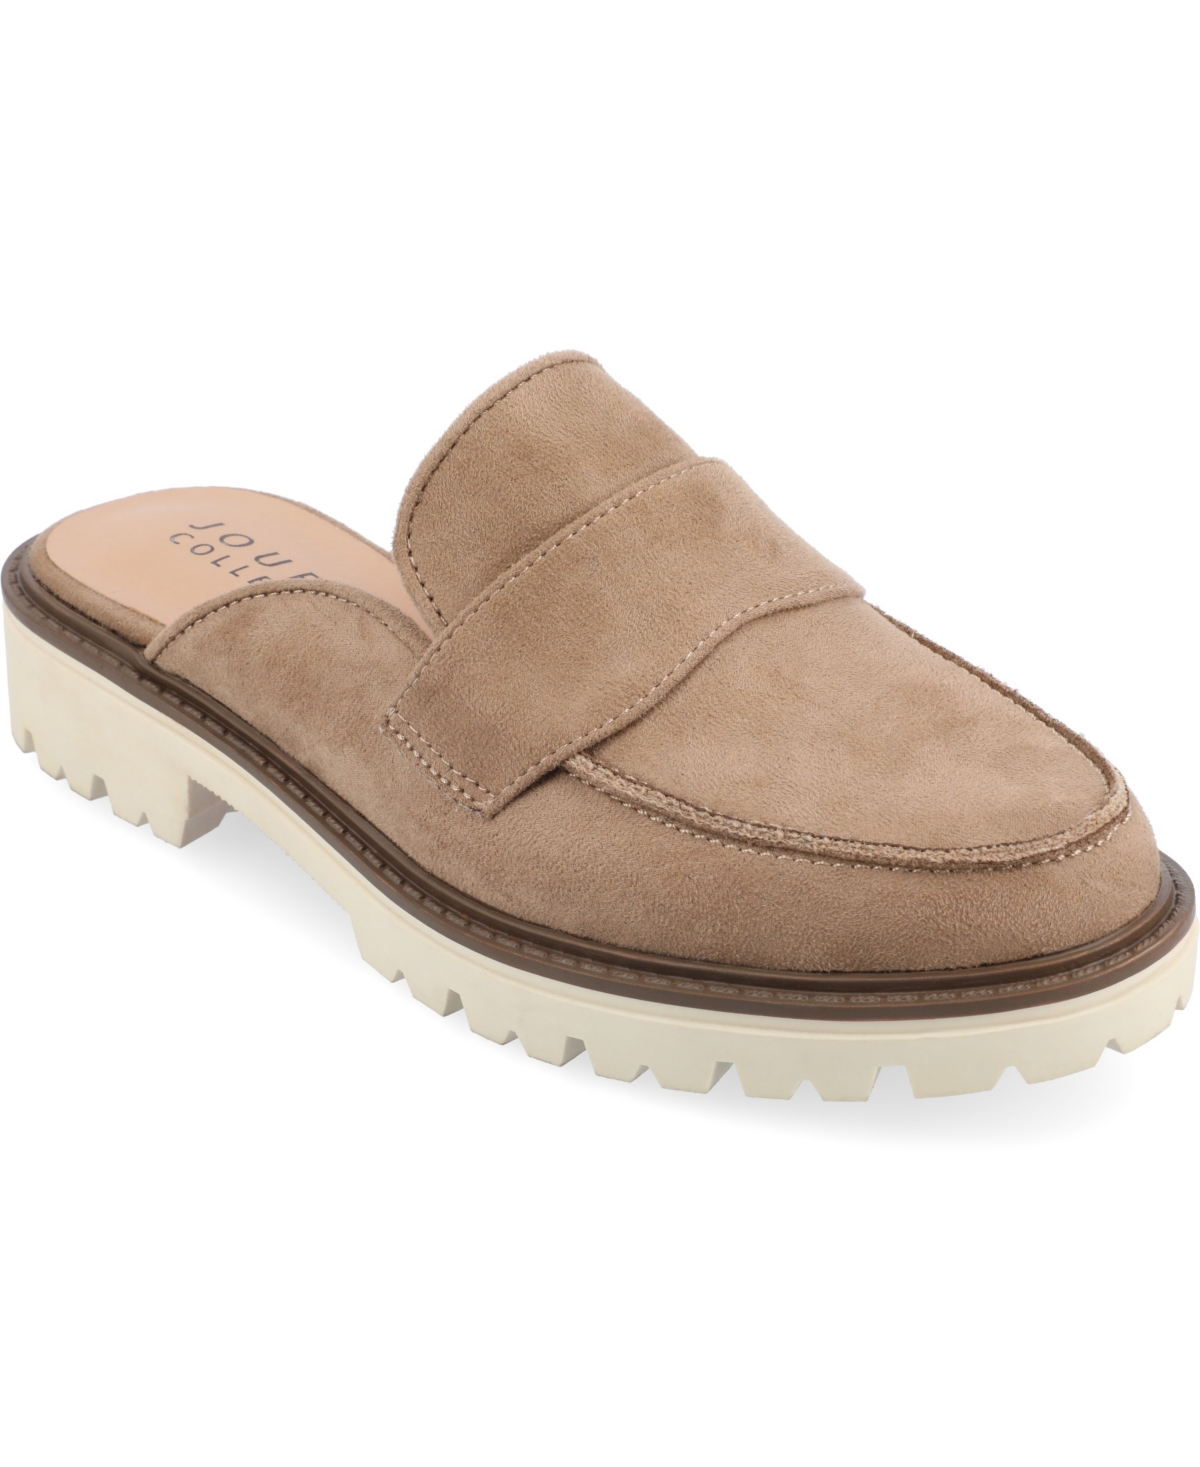 Women's Miycah Slip On Mule Flats - Taupe